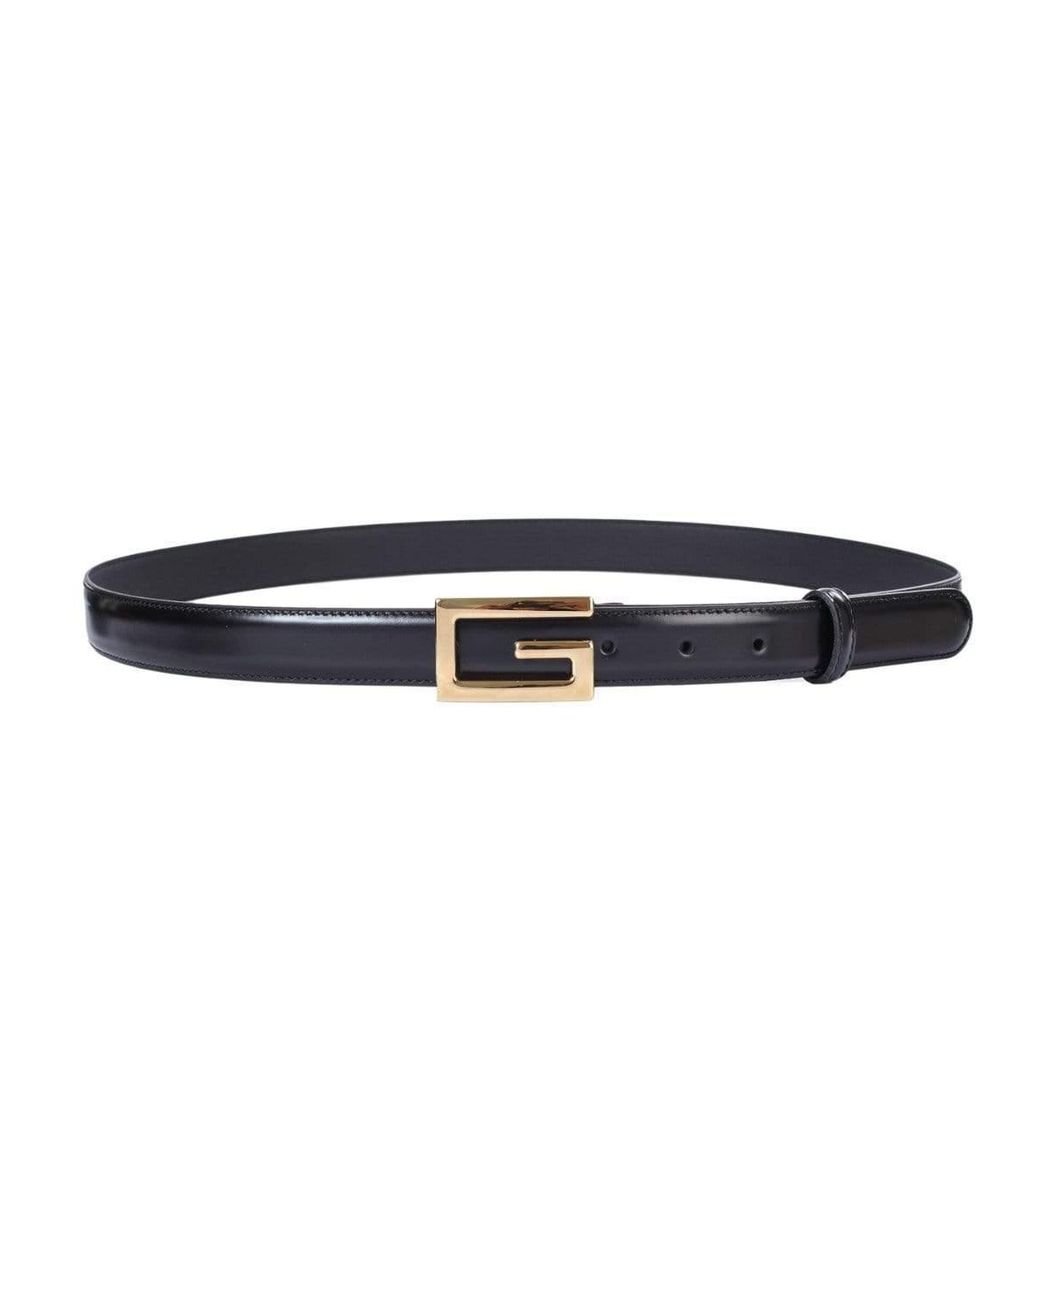 Gucci Thin Belt In Black Leather With Rectangular Buckle G for Men - Lyst